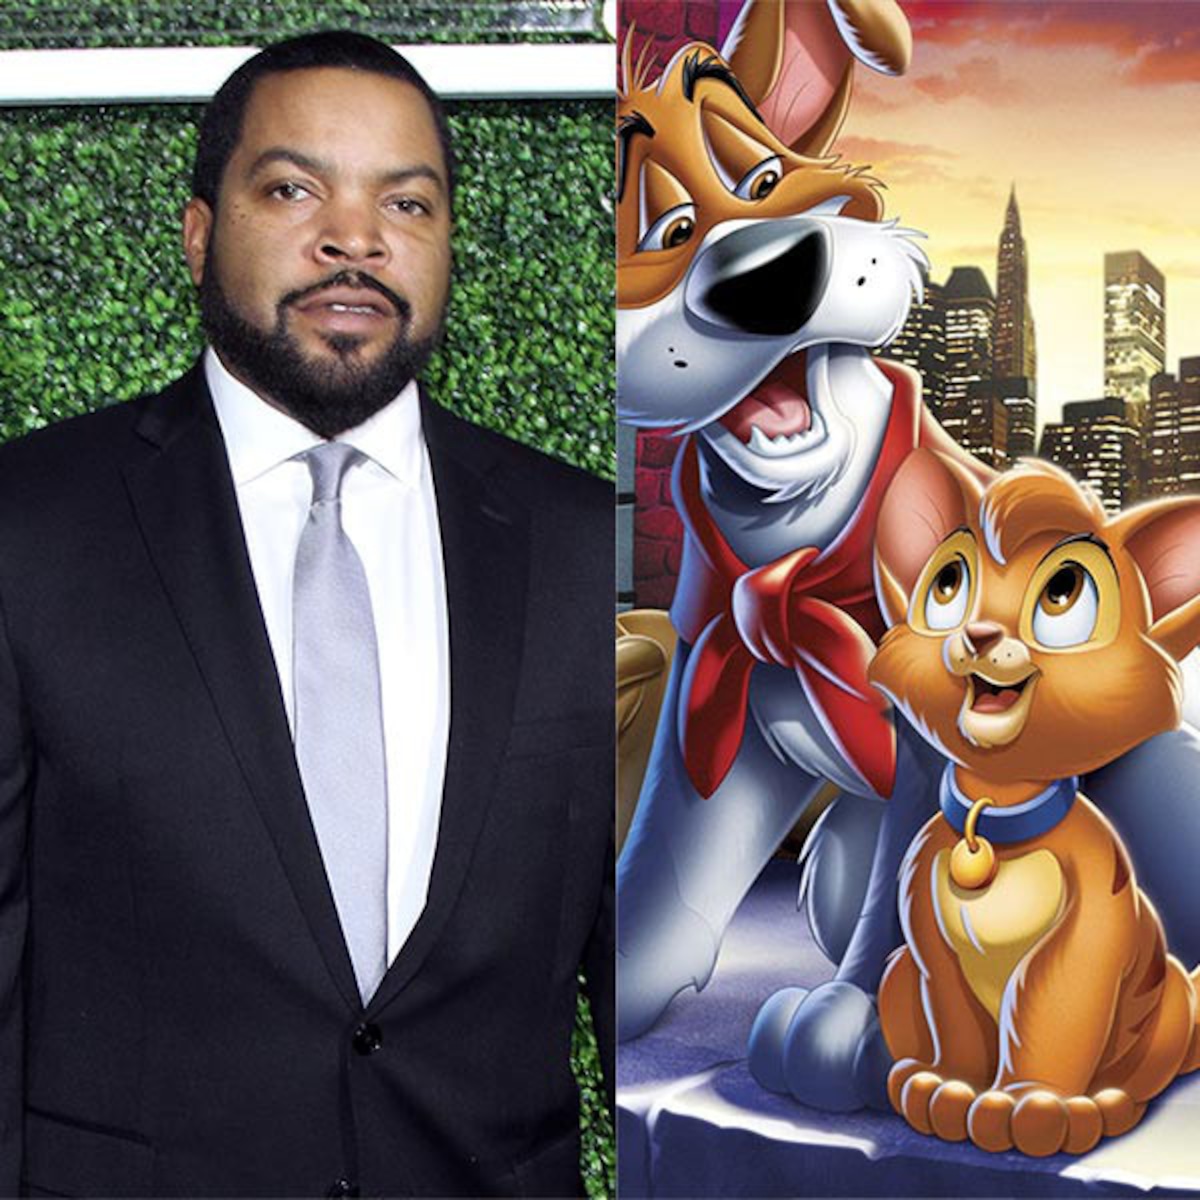 Disney & Ice Cube Team Up to Give Oliver Twist a Modern Twist - E! Online